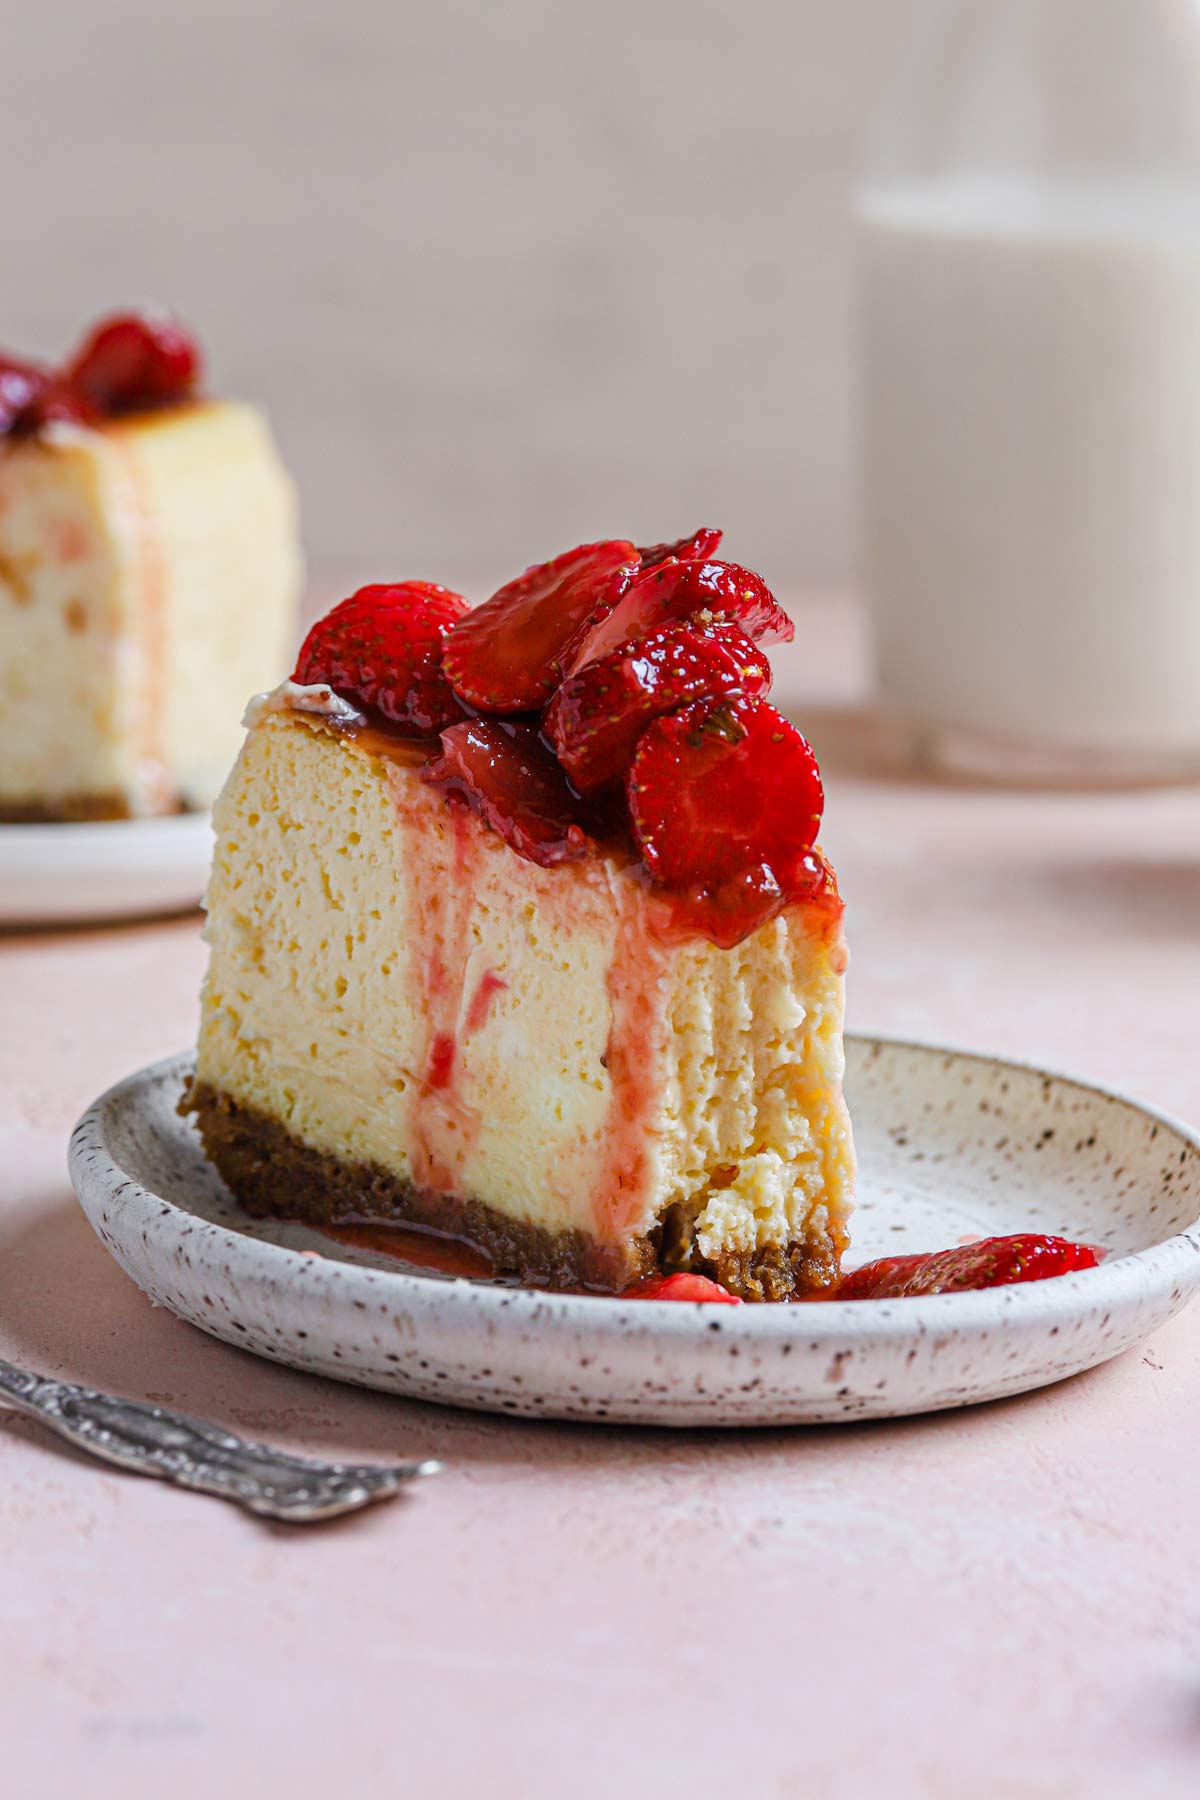 Slice of New York cheesecake with fresh strawberry topping on a plate.